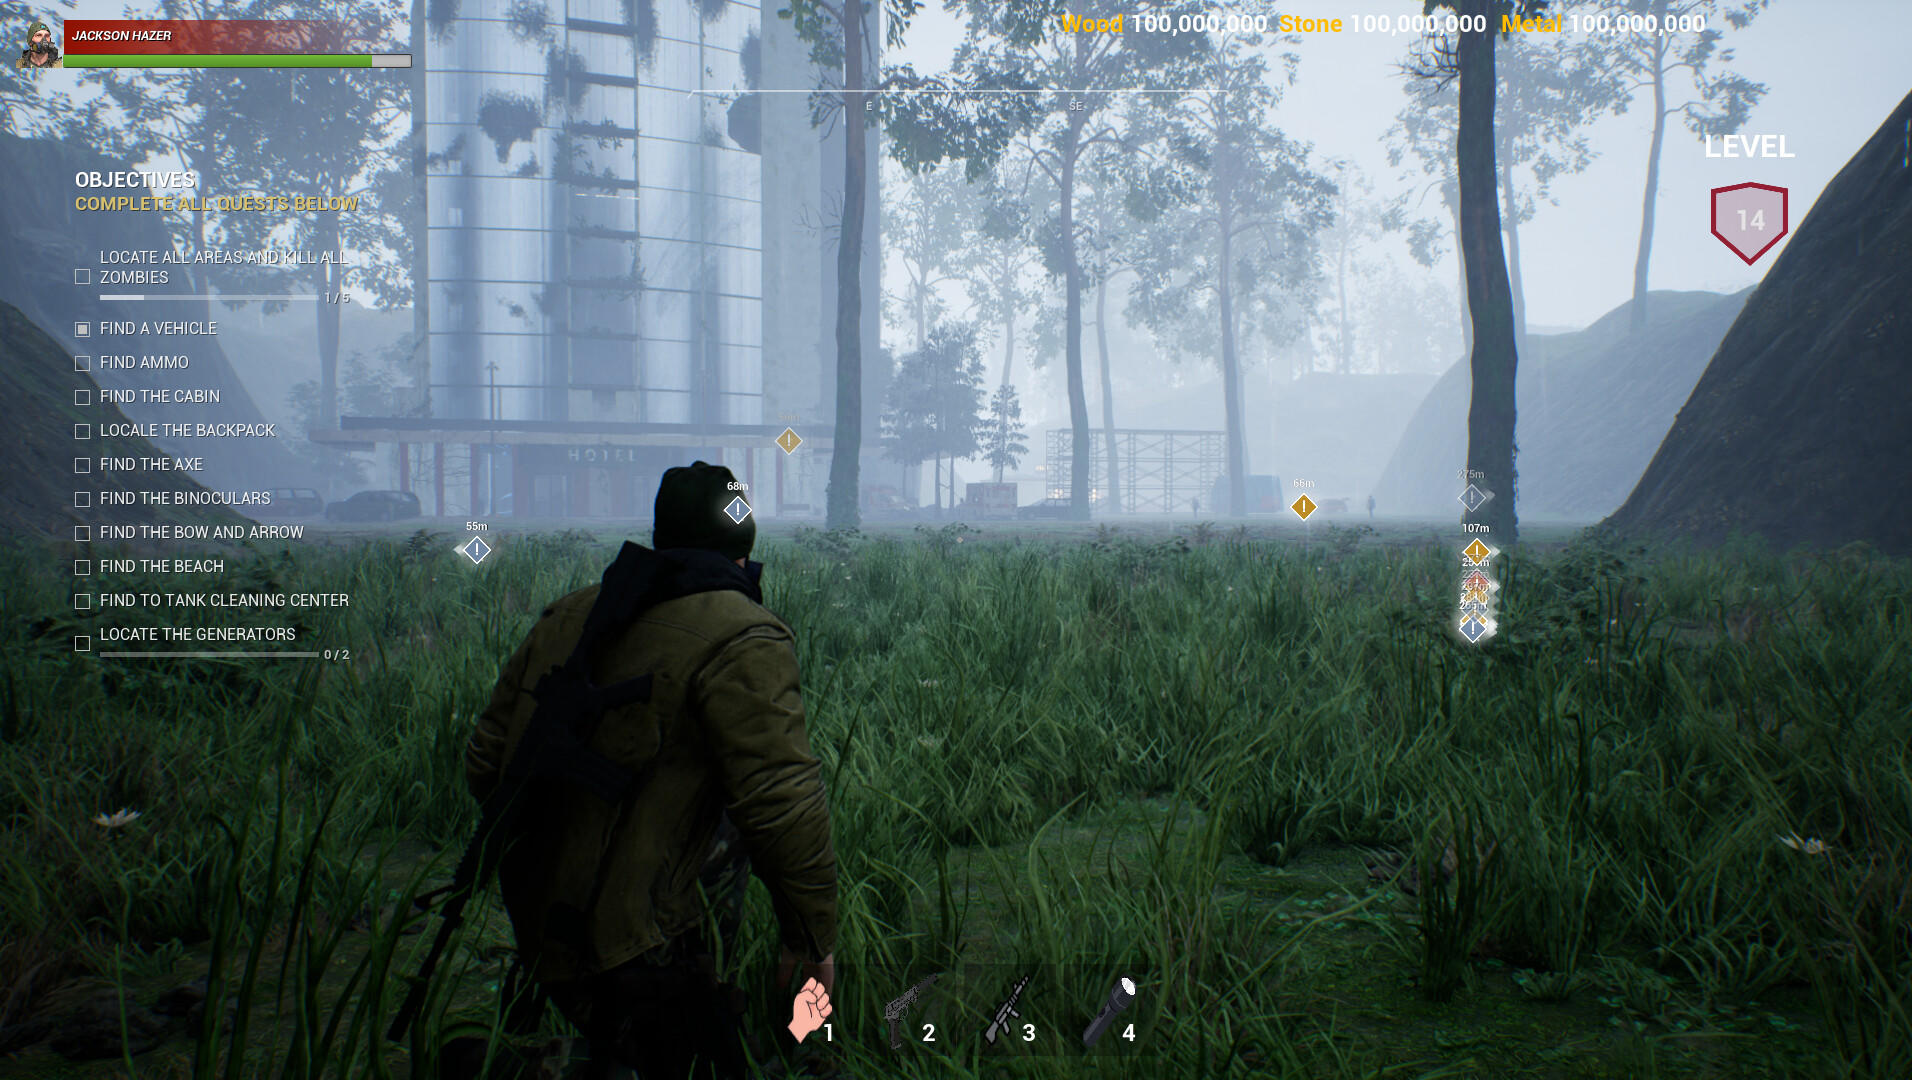 The Day Of Survival screenshot game